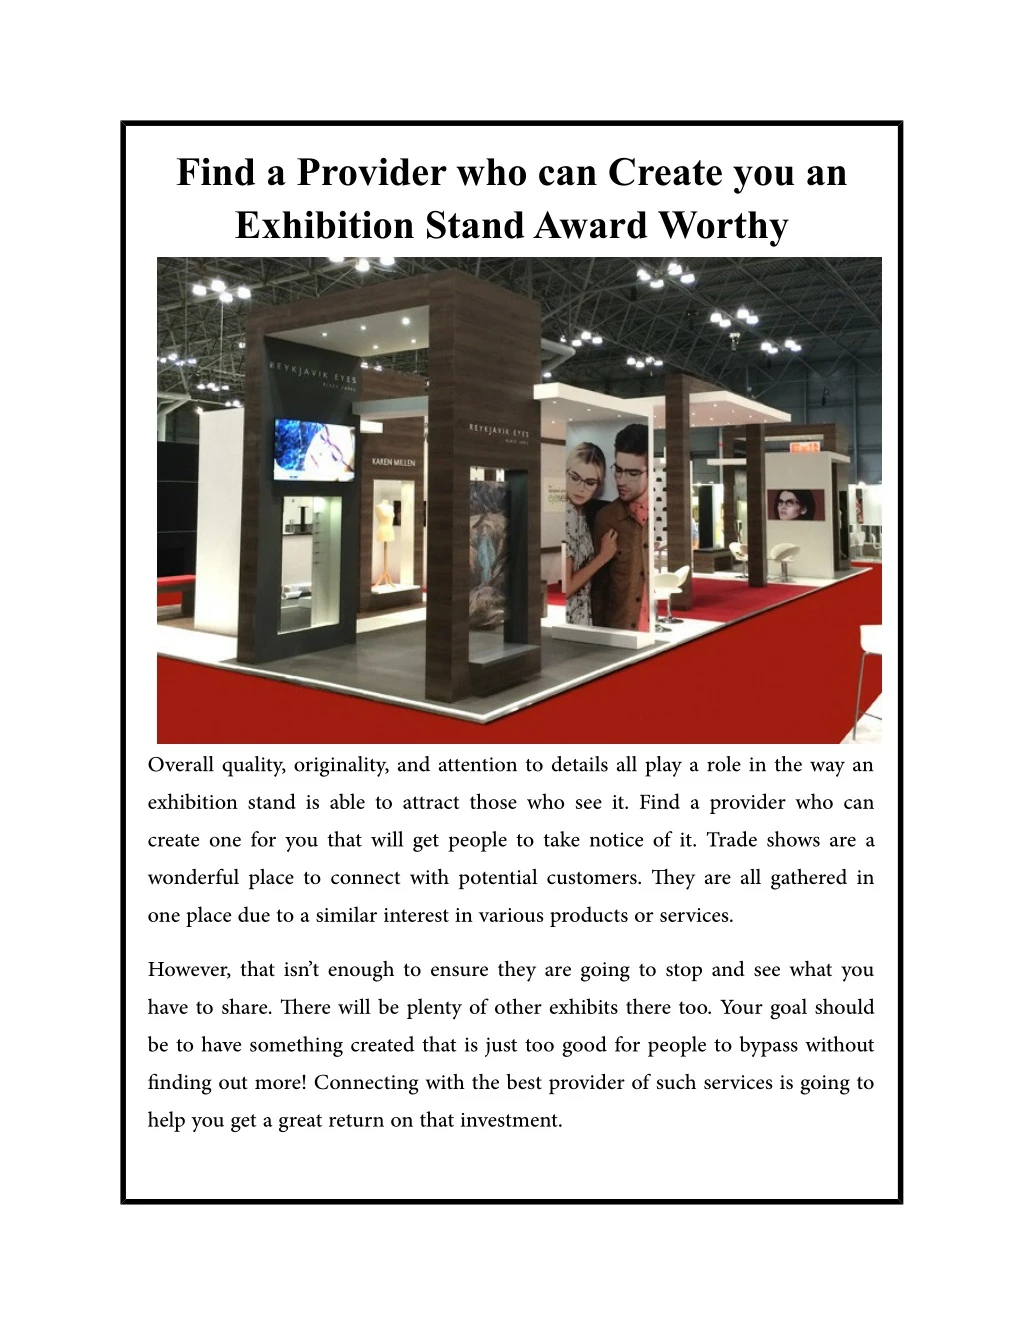 find a provider who can create you an exhibition